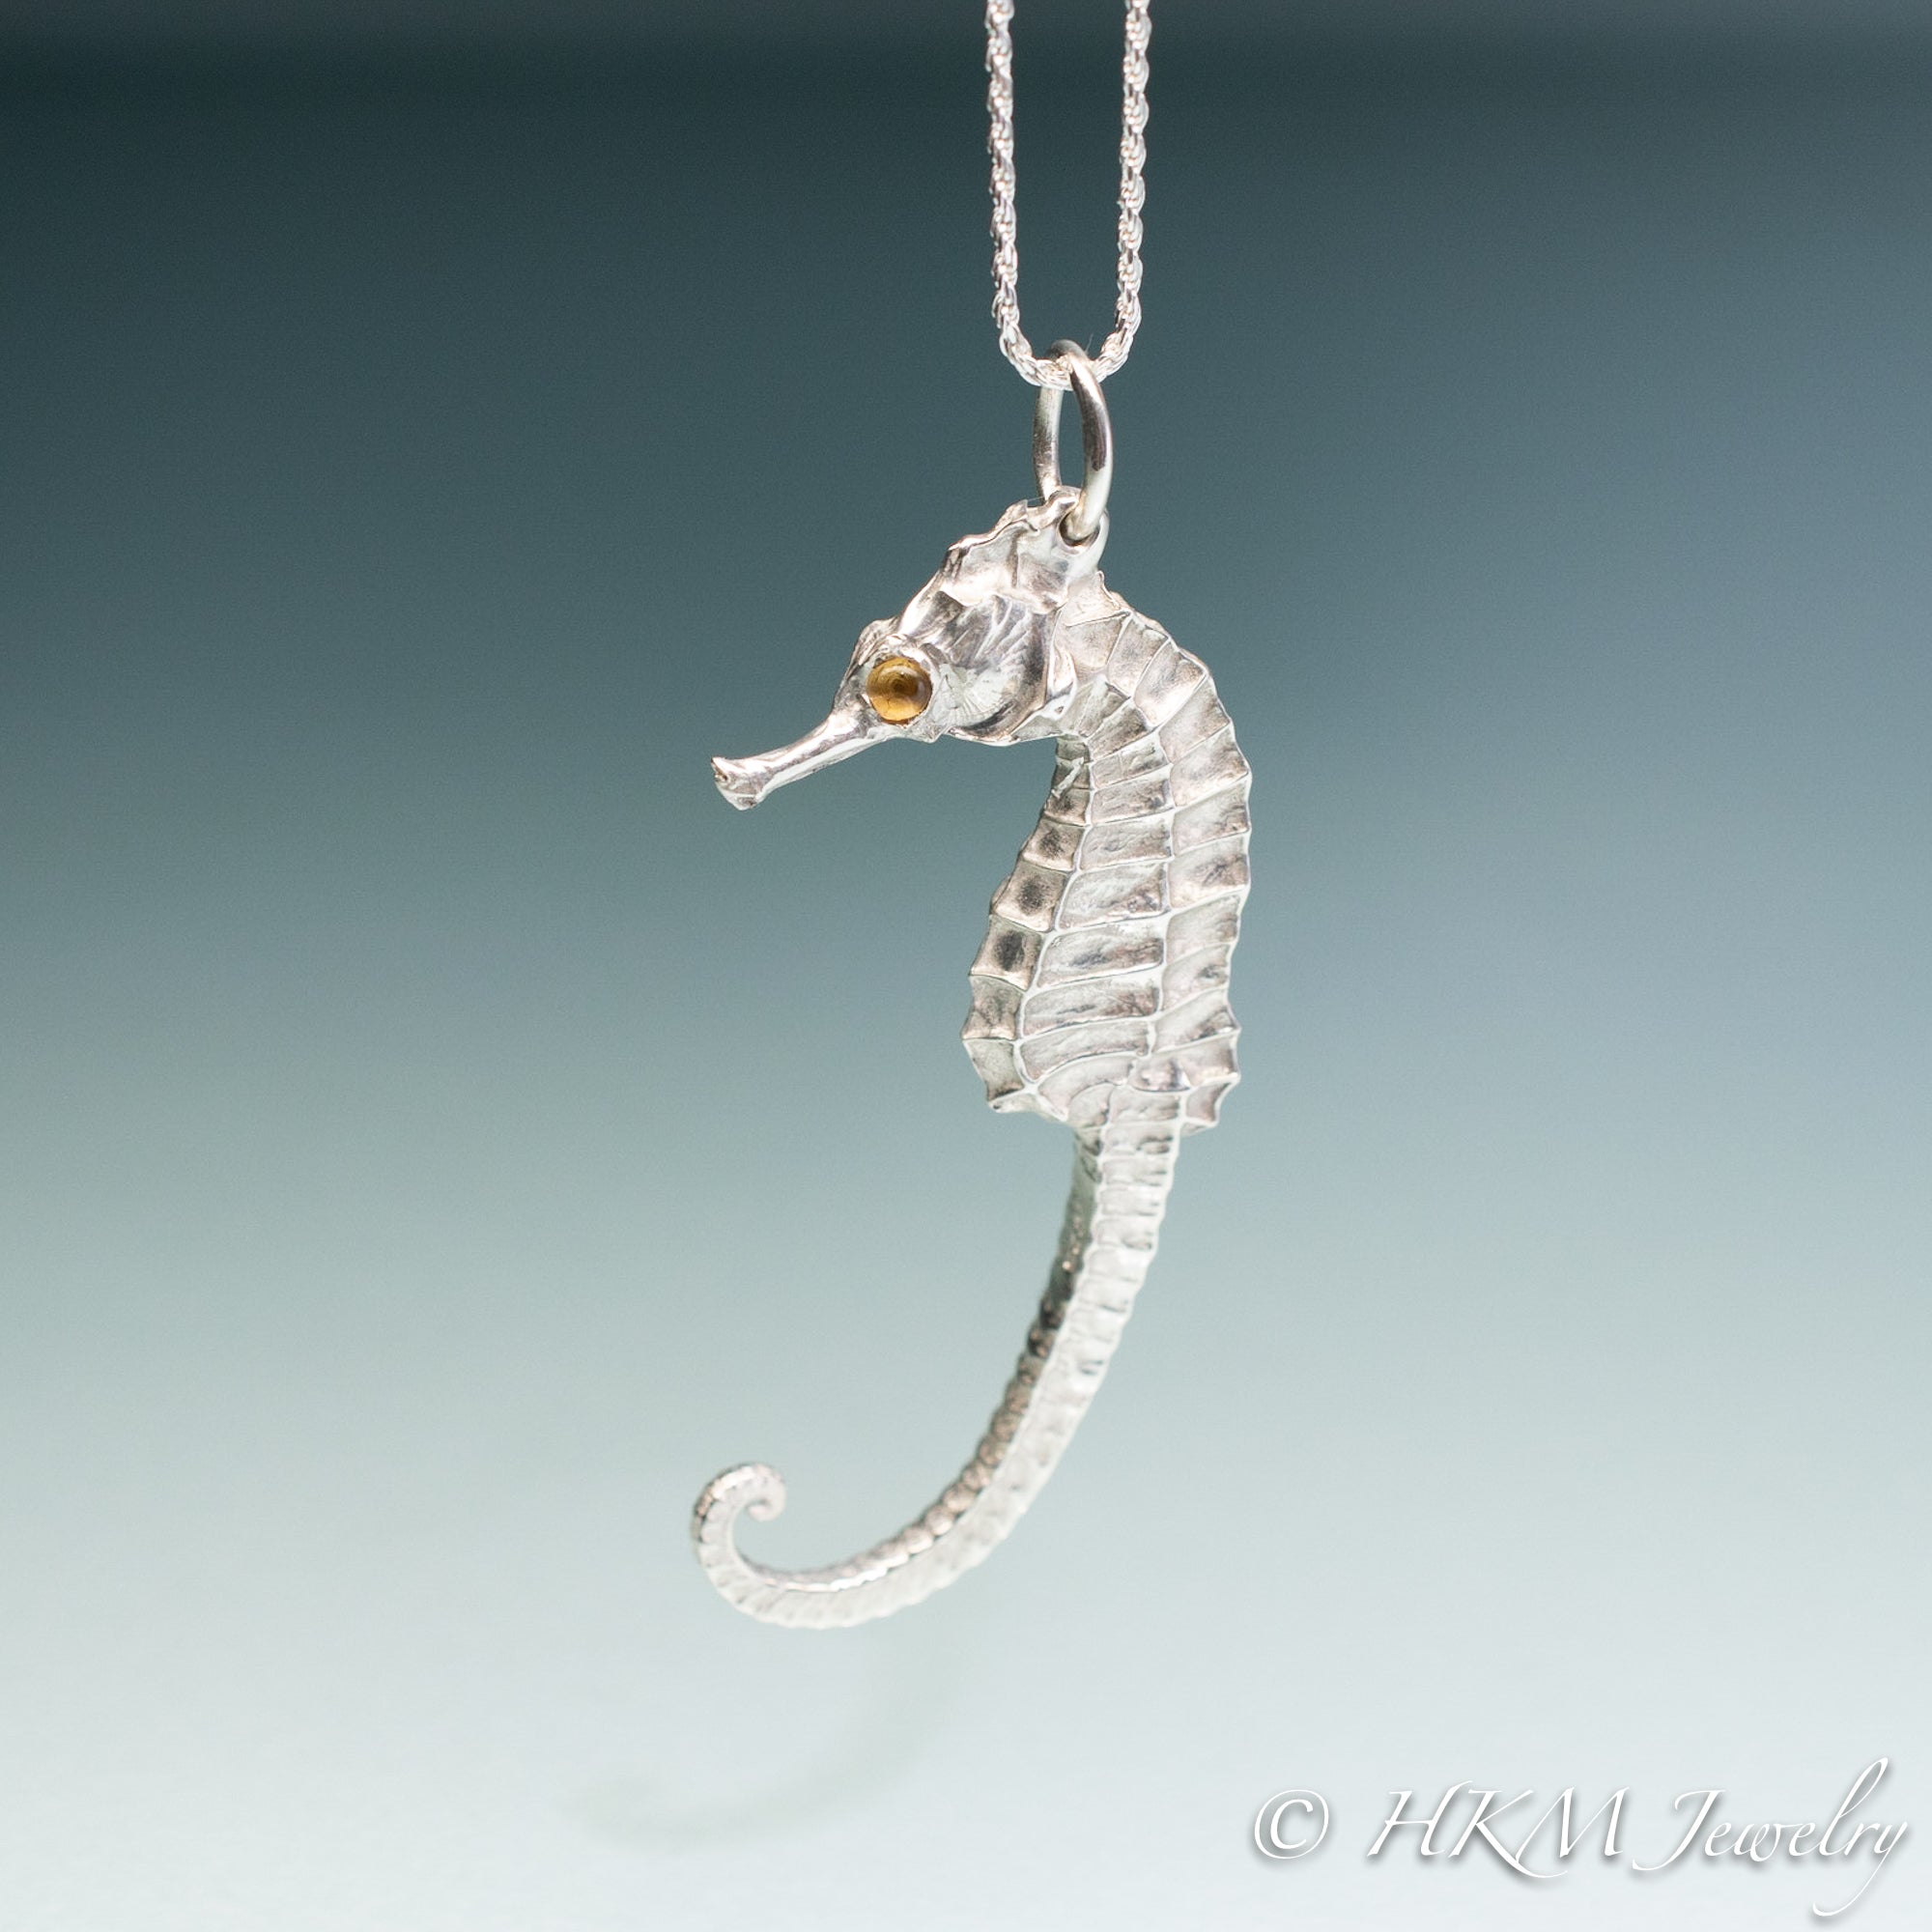 Fish Necklace - The Silver Seahorse